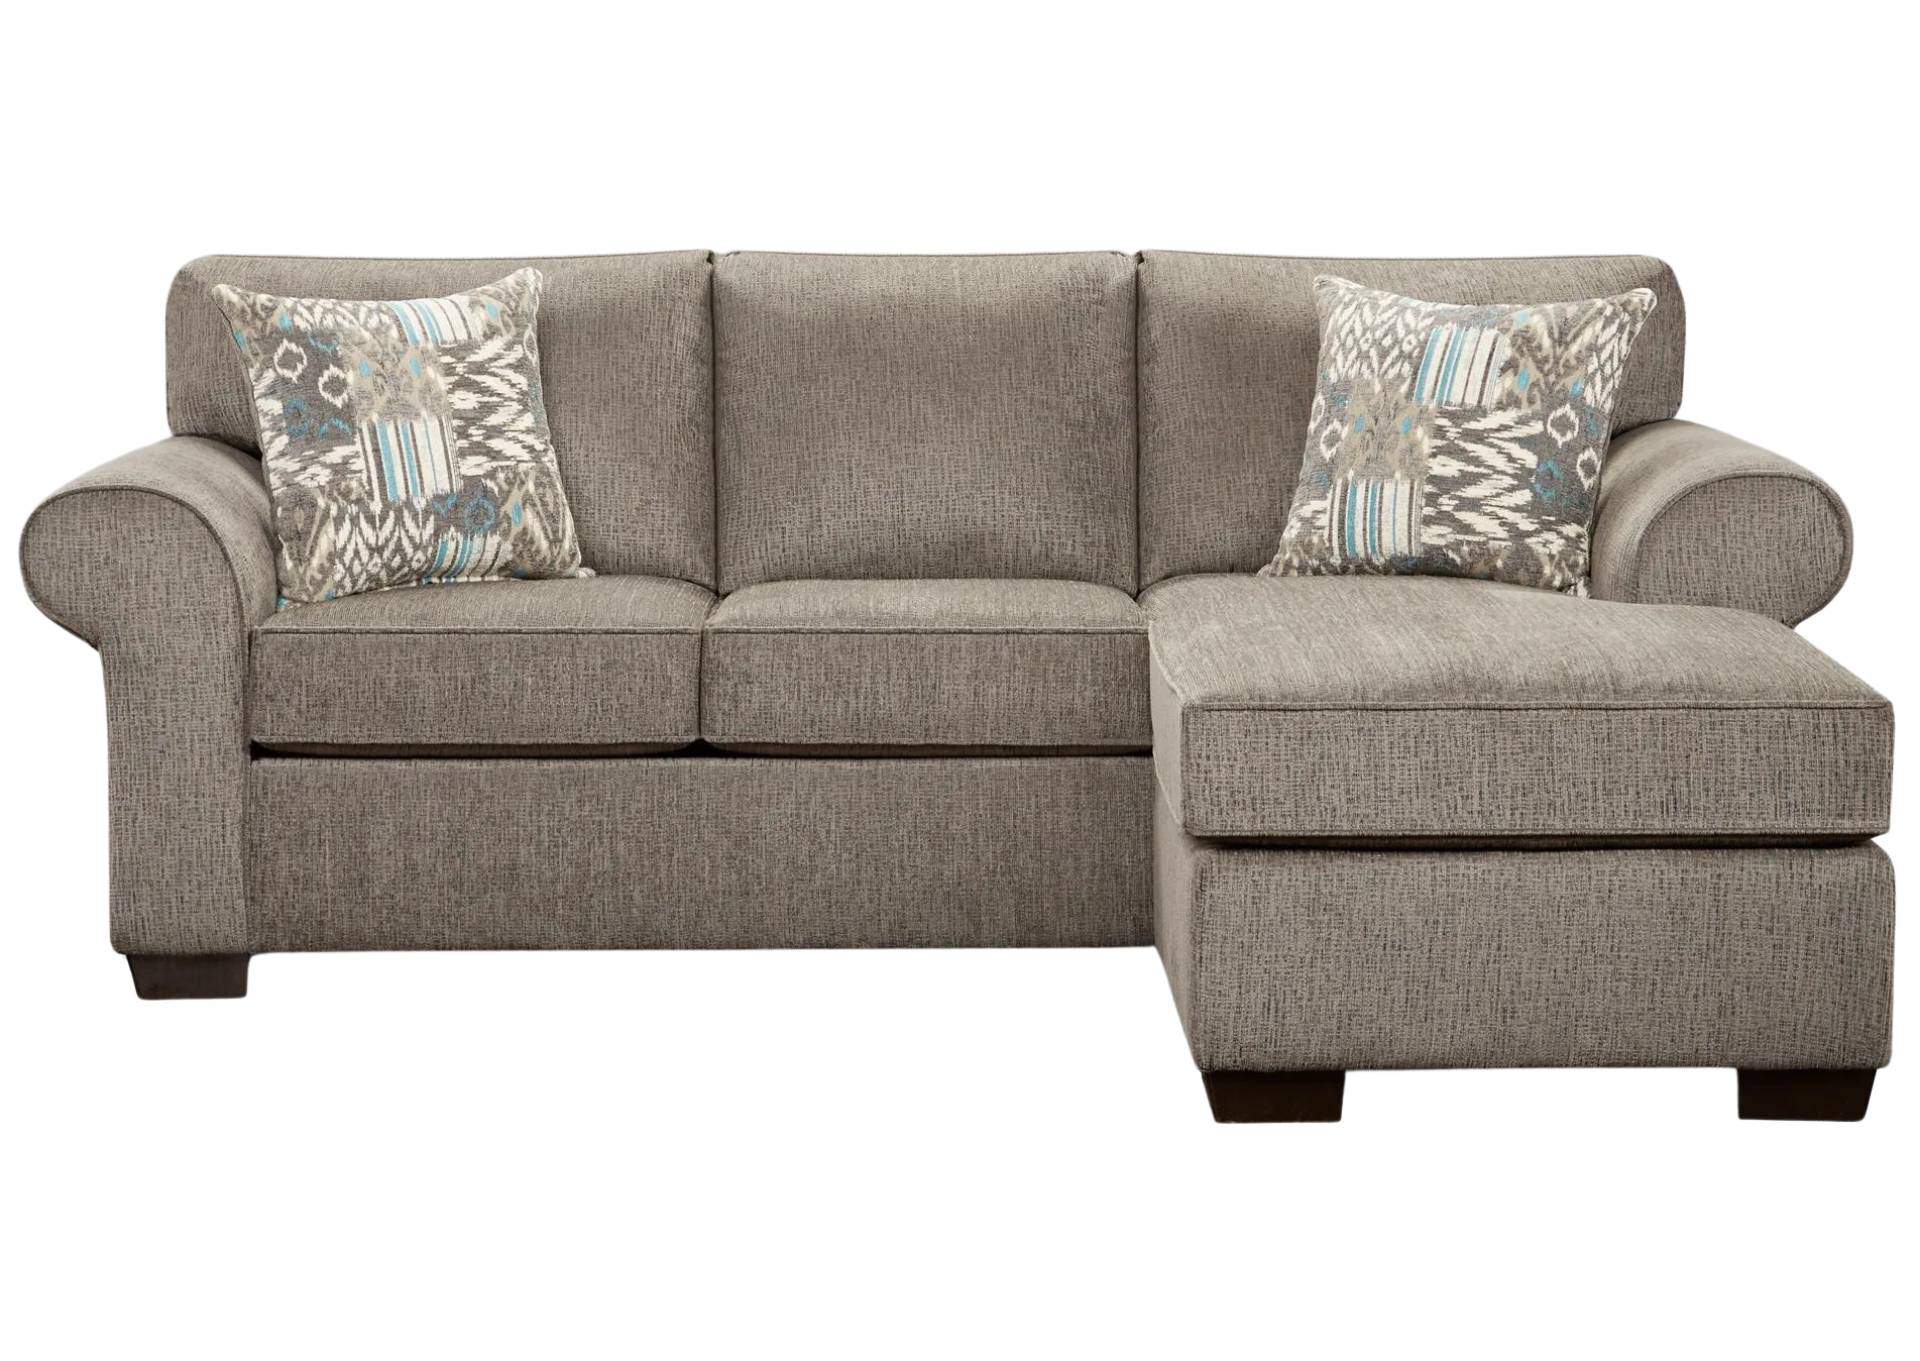 MARCEY NICKEL 2 PIECE SECTIONAL,AFFORDABLE FURNITURE